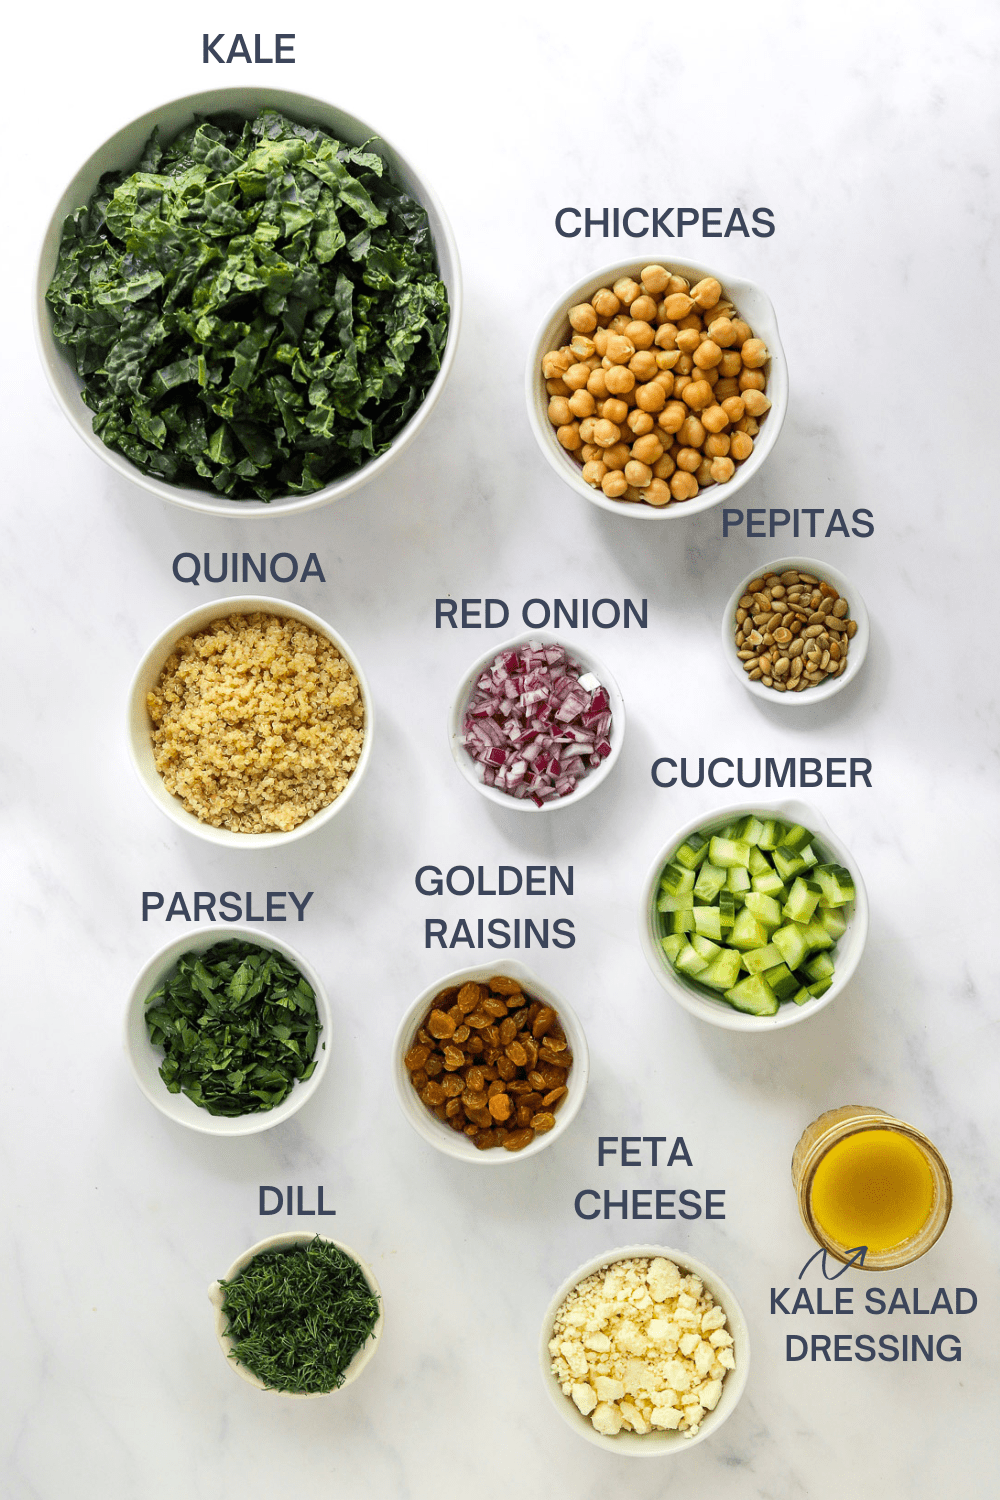 Bowls with ingredients for kale salad with labels for each ingredient. 